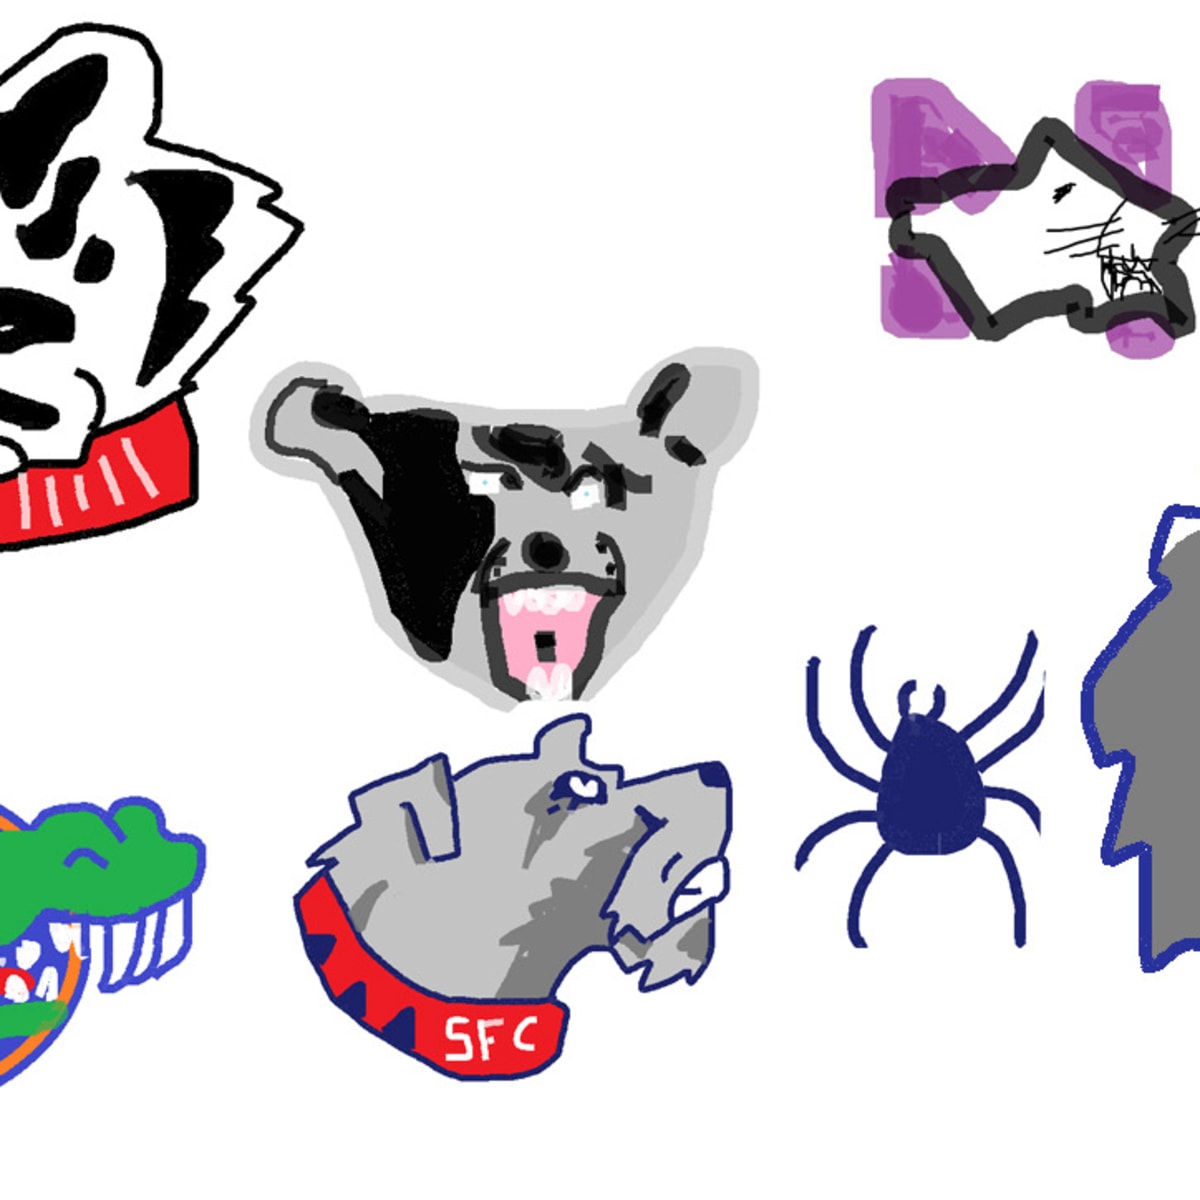 College basketball logos on MS paint done by reddit user